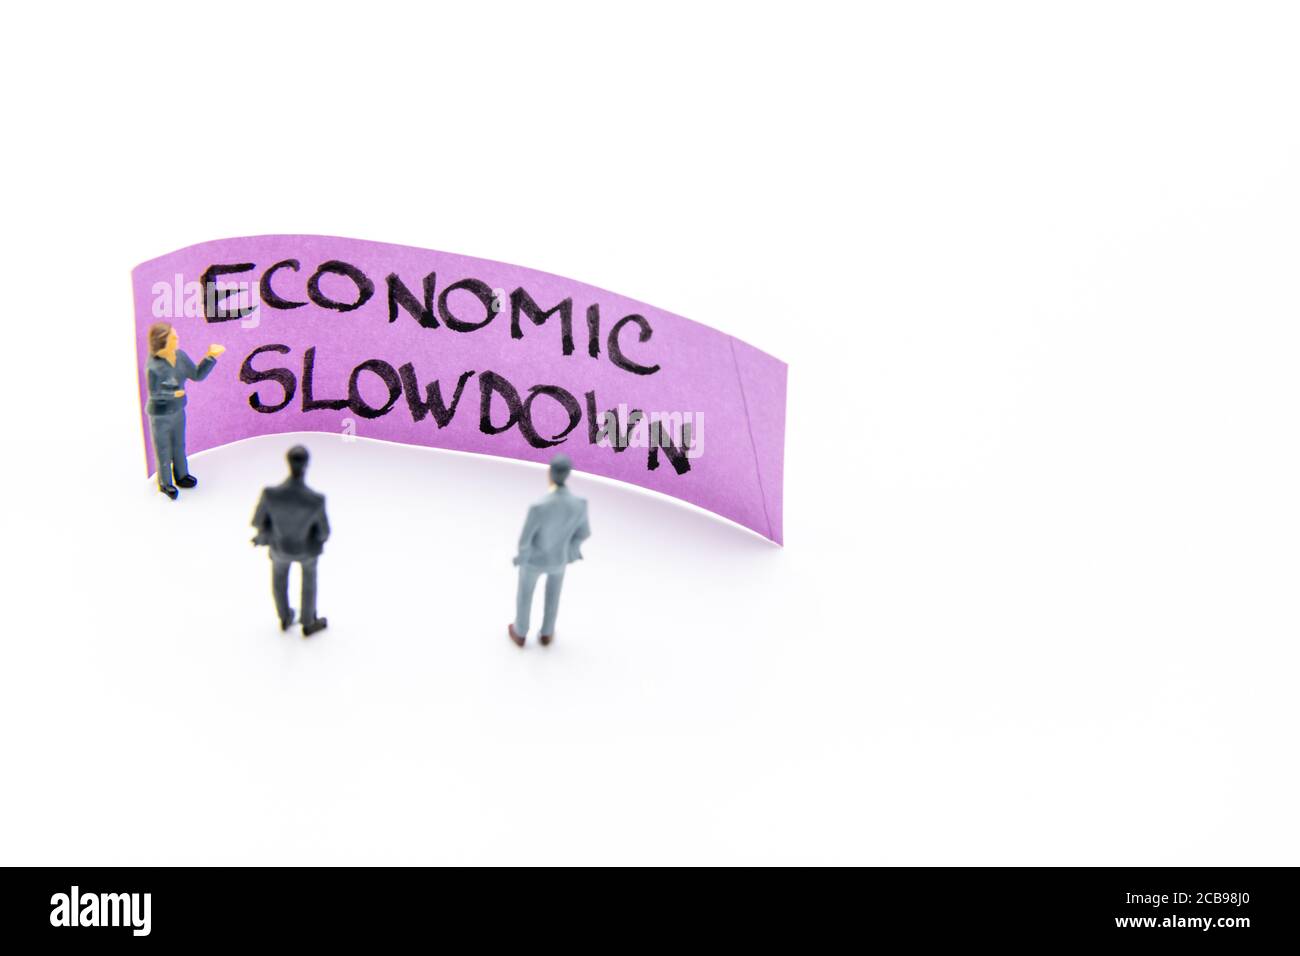 Presentation meeting with miniature figurines posed as business people standing in front of post-it note with Economic Slowdown handwritten message in Stock Photo